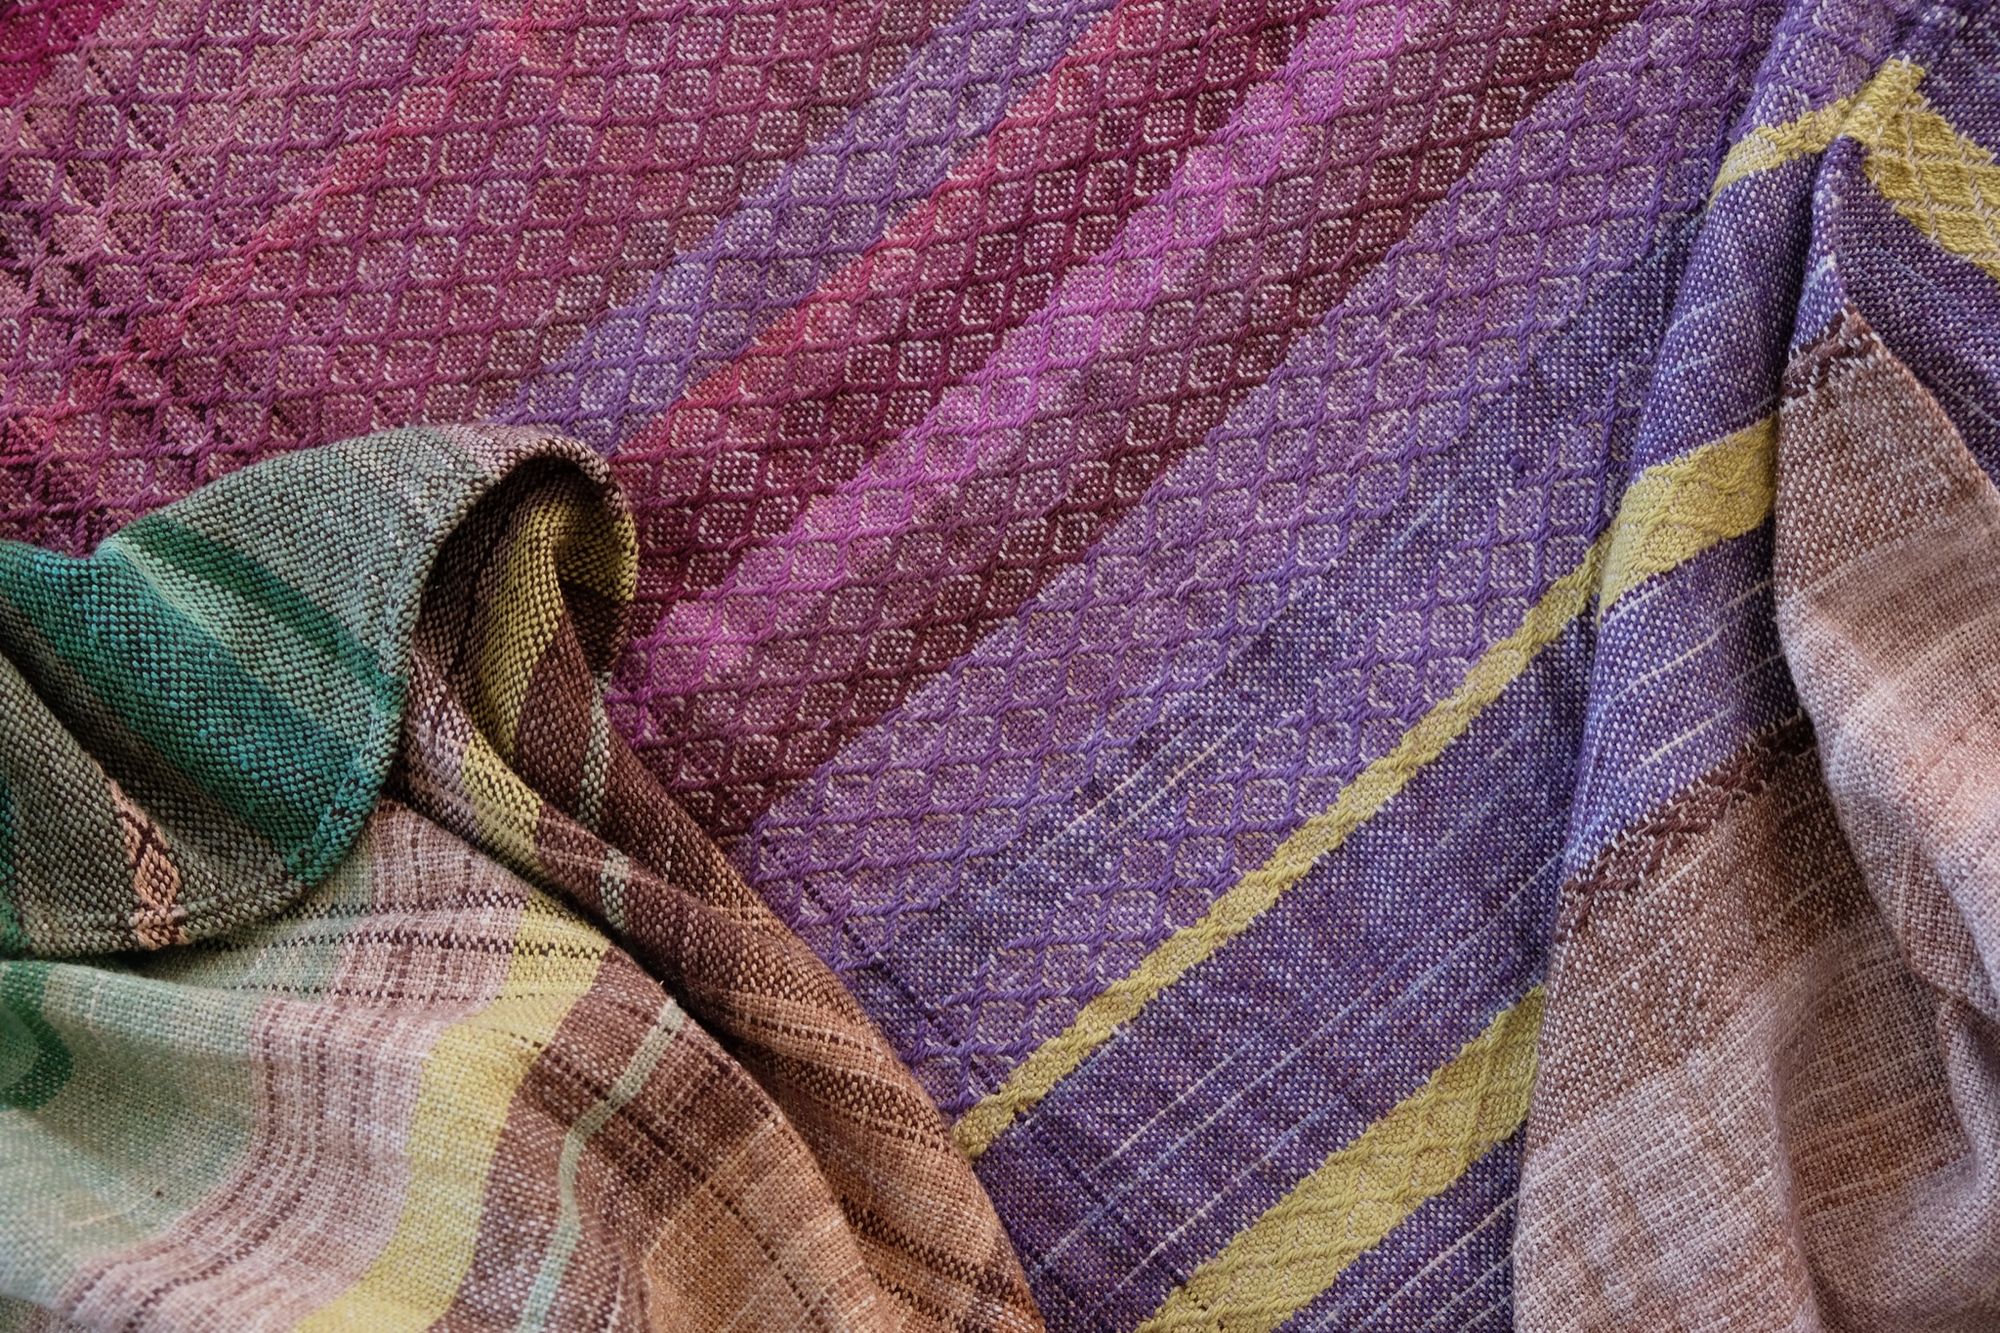 detail of Handwoven raw silk fabric with textures diamond weave in browns, tans, purples, blues, yellows, pink and orange laying on a wooden floor